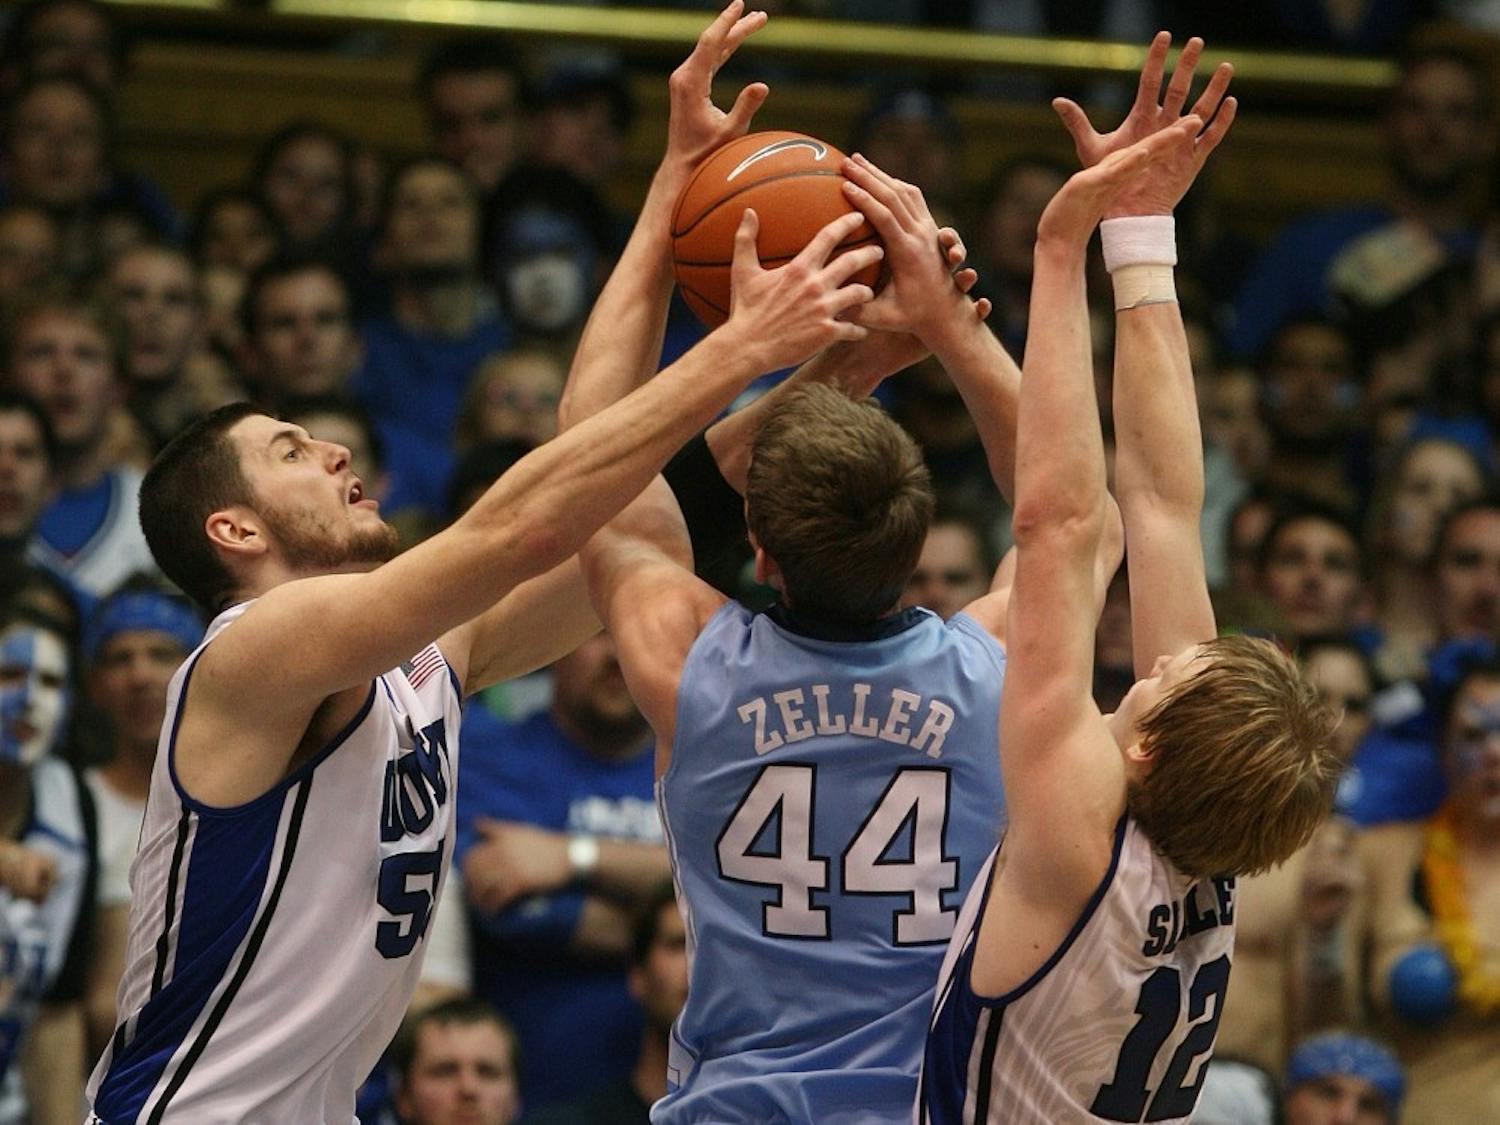 Duke's Brian Zoubek (55) and Kyle Singler (12) double-team North Carolina's Tyler Zeller (44) during NCAA men's basketball action at Cameron Indoor Stadium, in Durham, North Carolina, on Saturday, March 6, 2010. Duke topped North Carolina, 82-50. (Chuck Liddy/Raleigh News & Observer/MCT0